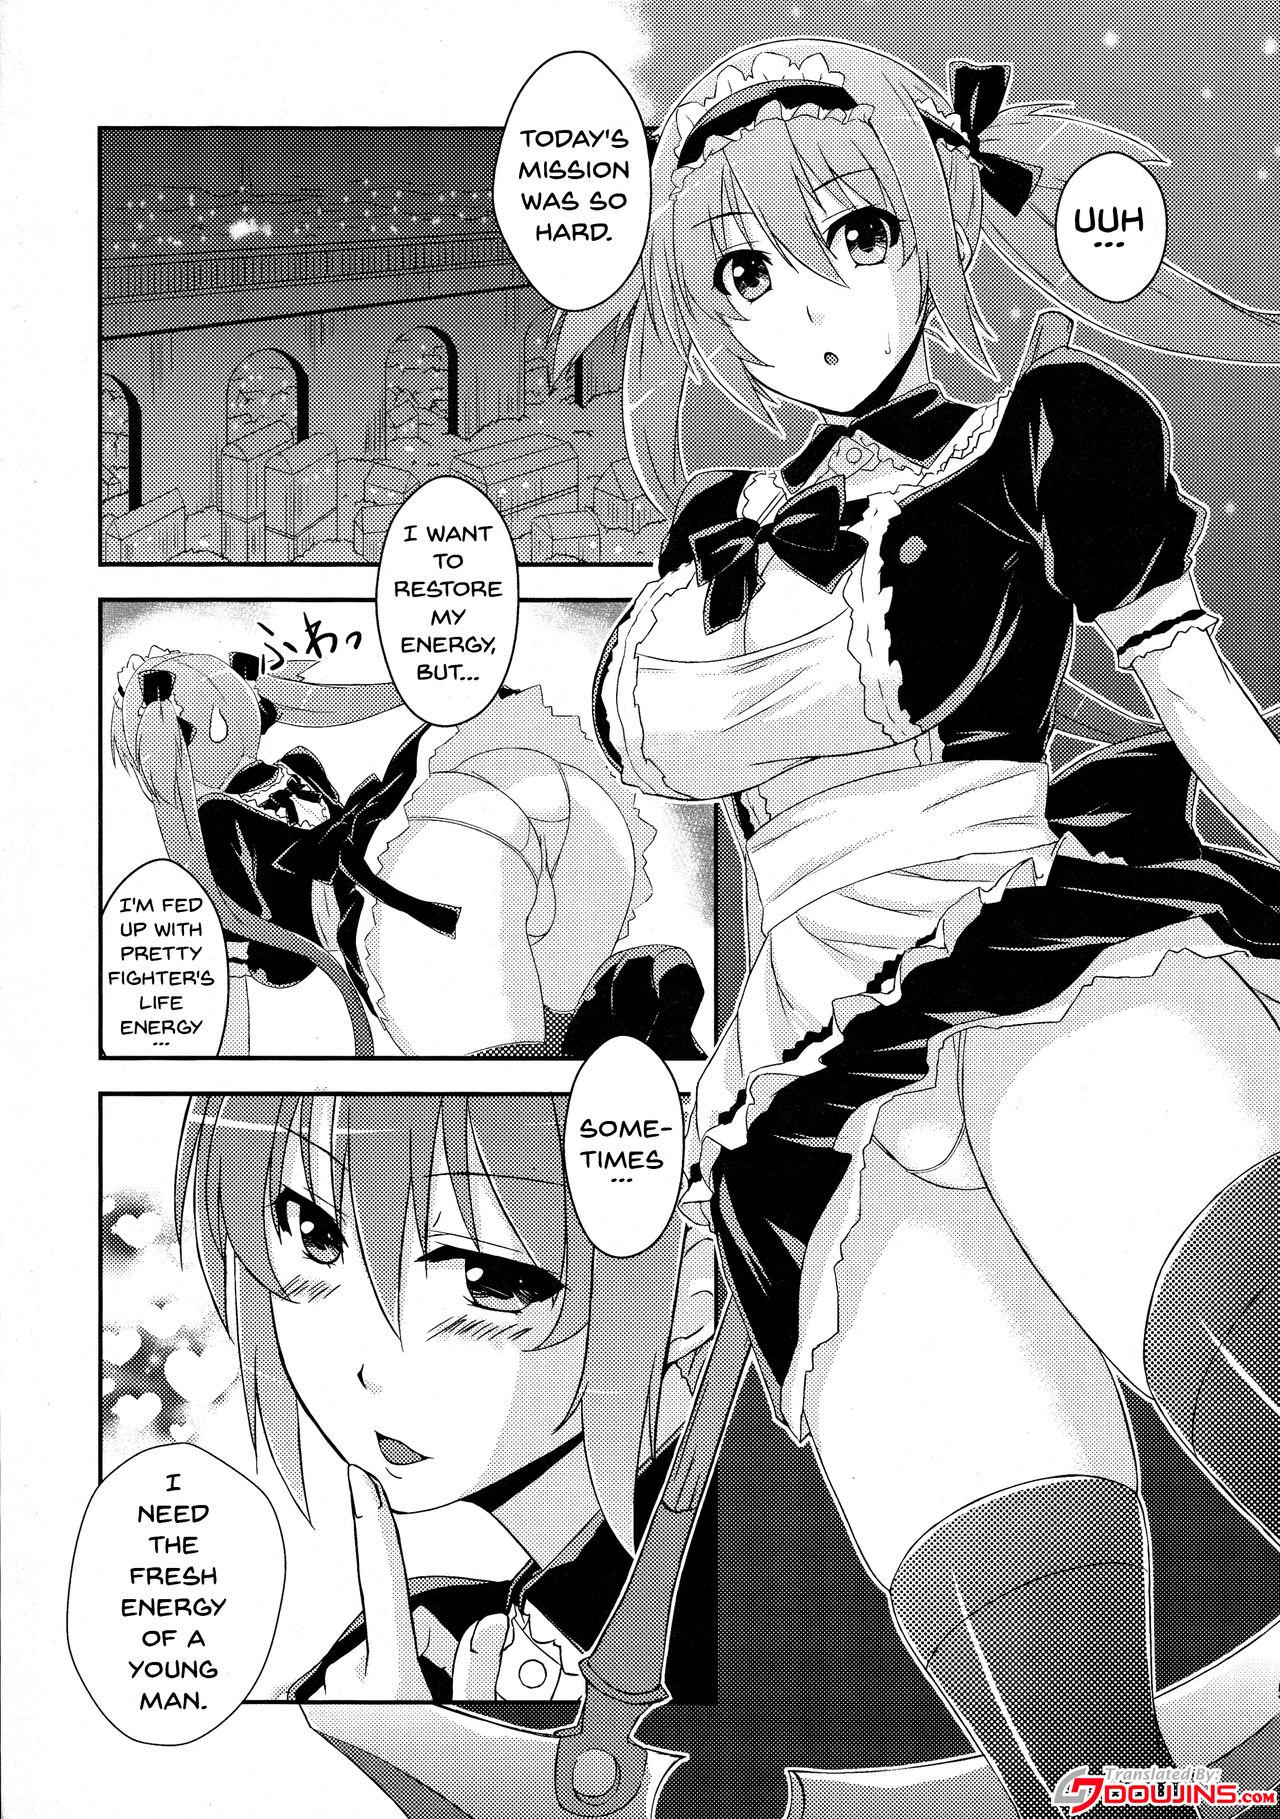 Fucked Hard Queen's Usuihon - Queens blade Gay 3some - Page 3